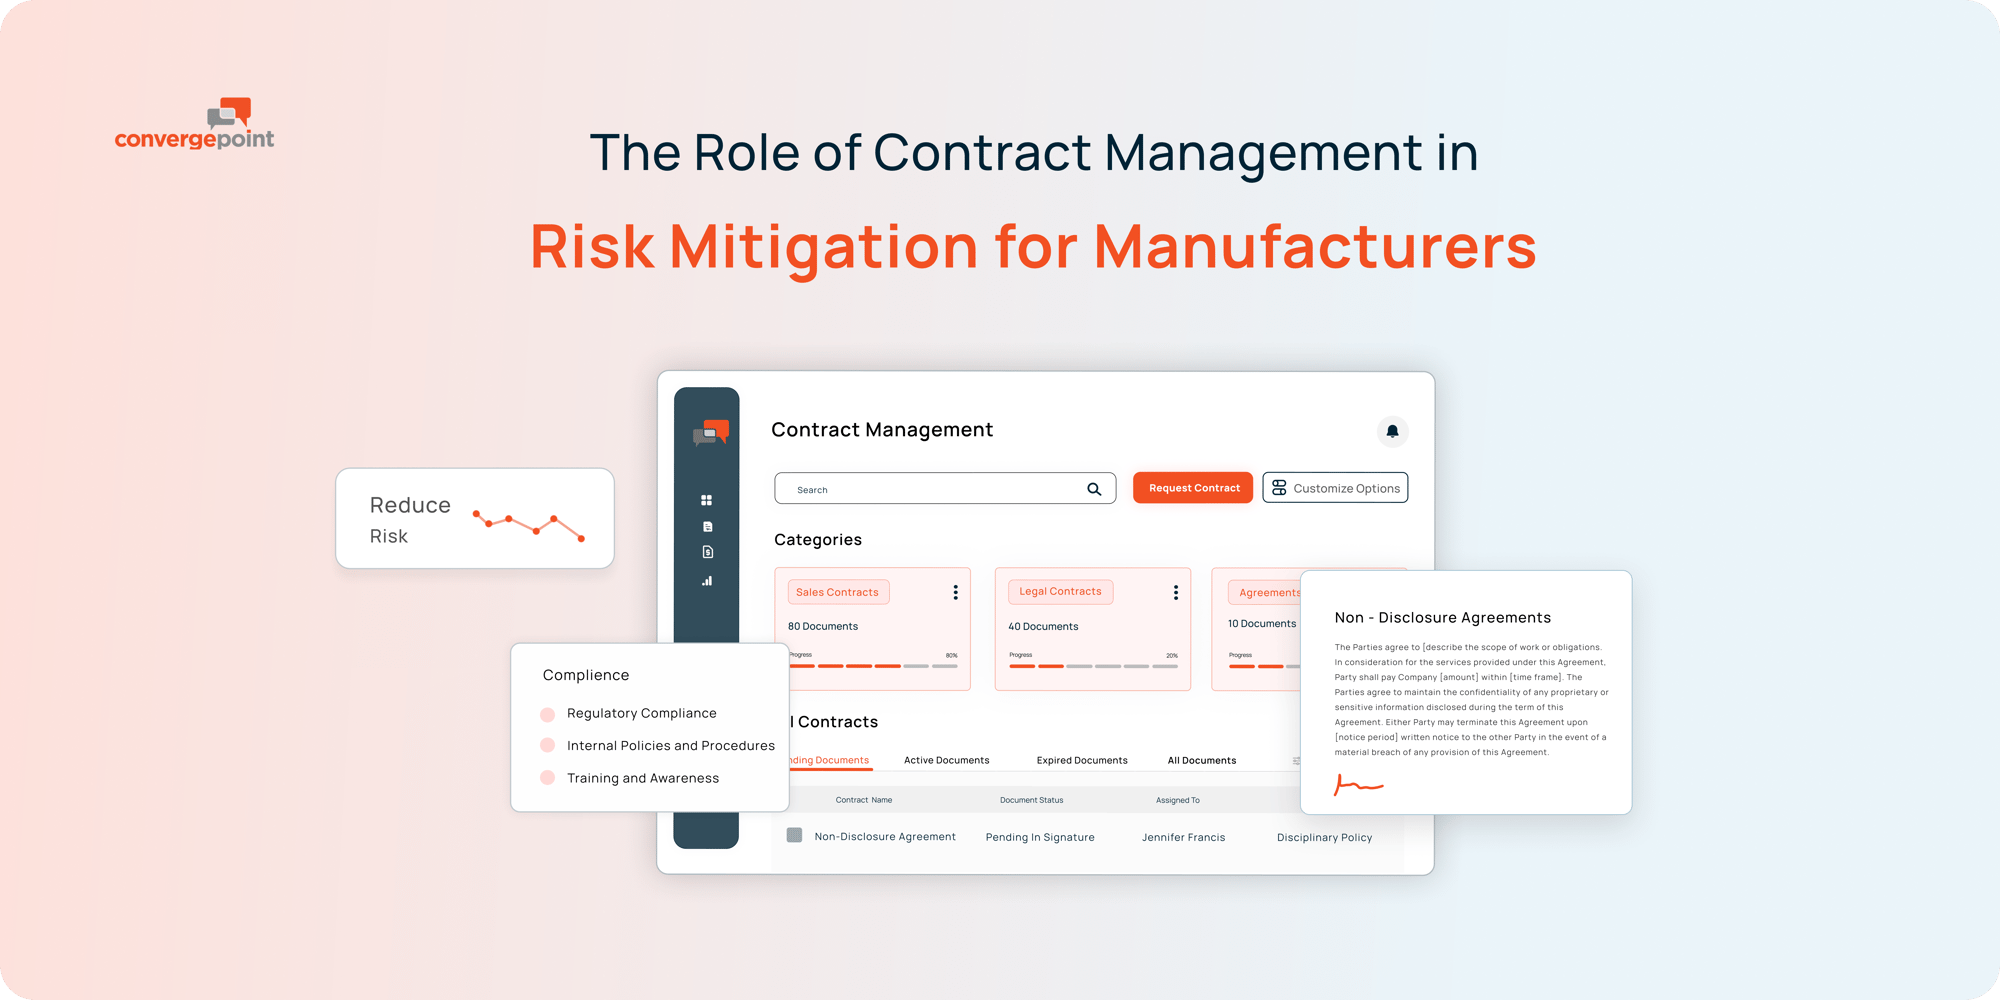 The Role of Contract Management in Risk Mitigation for Manufacturers